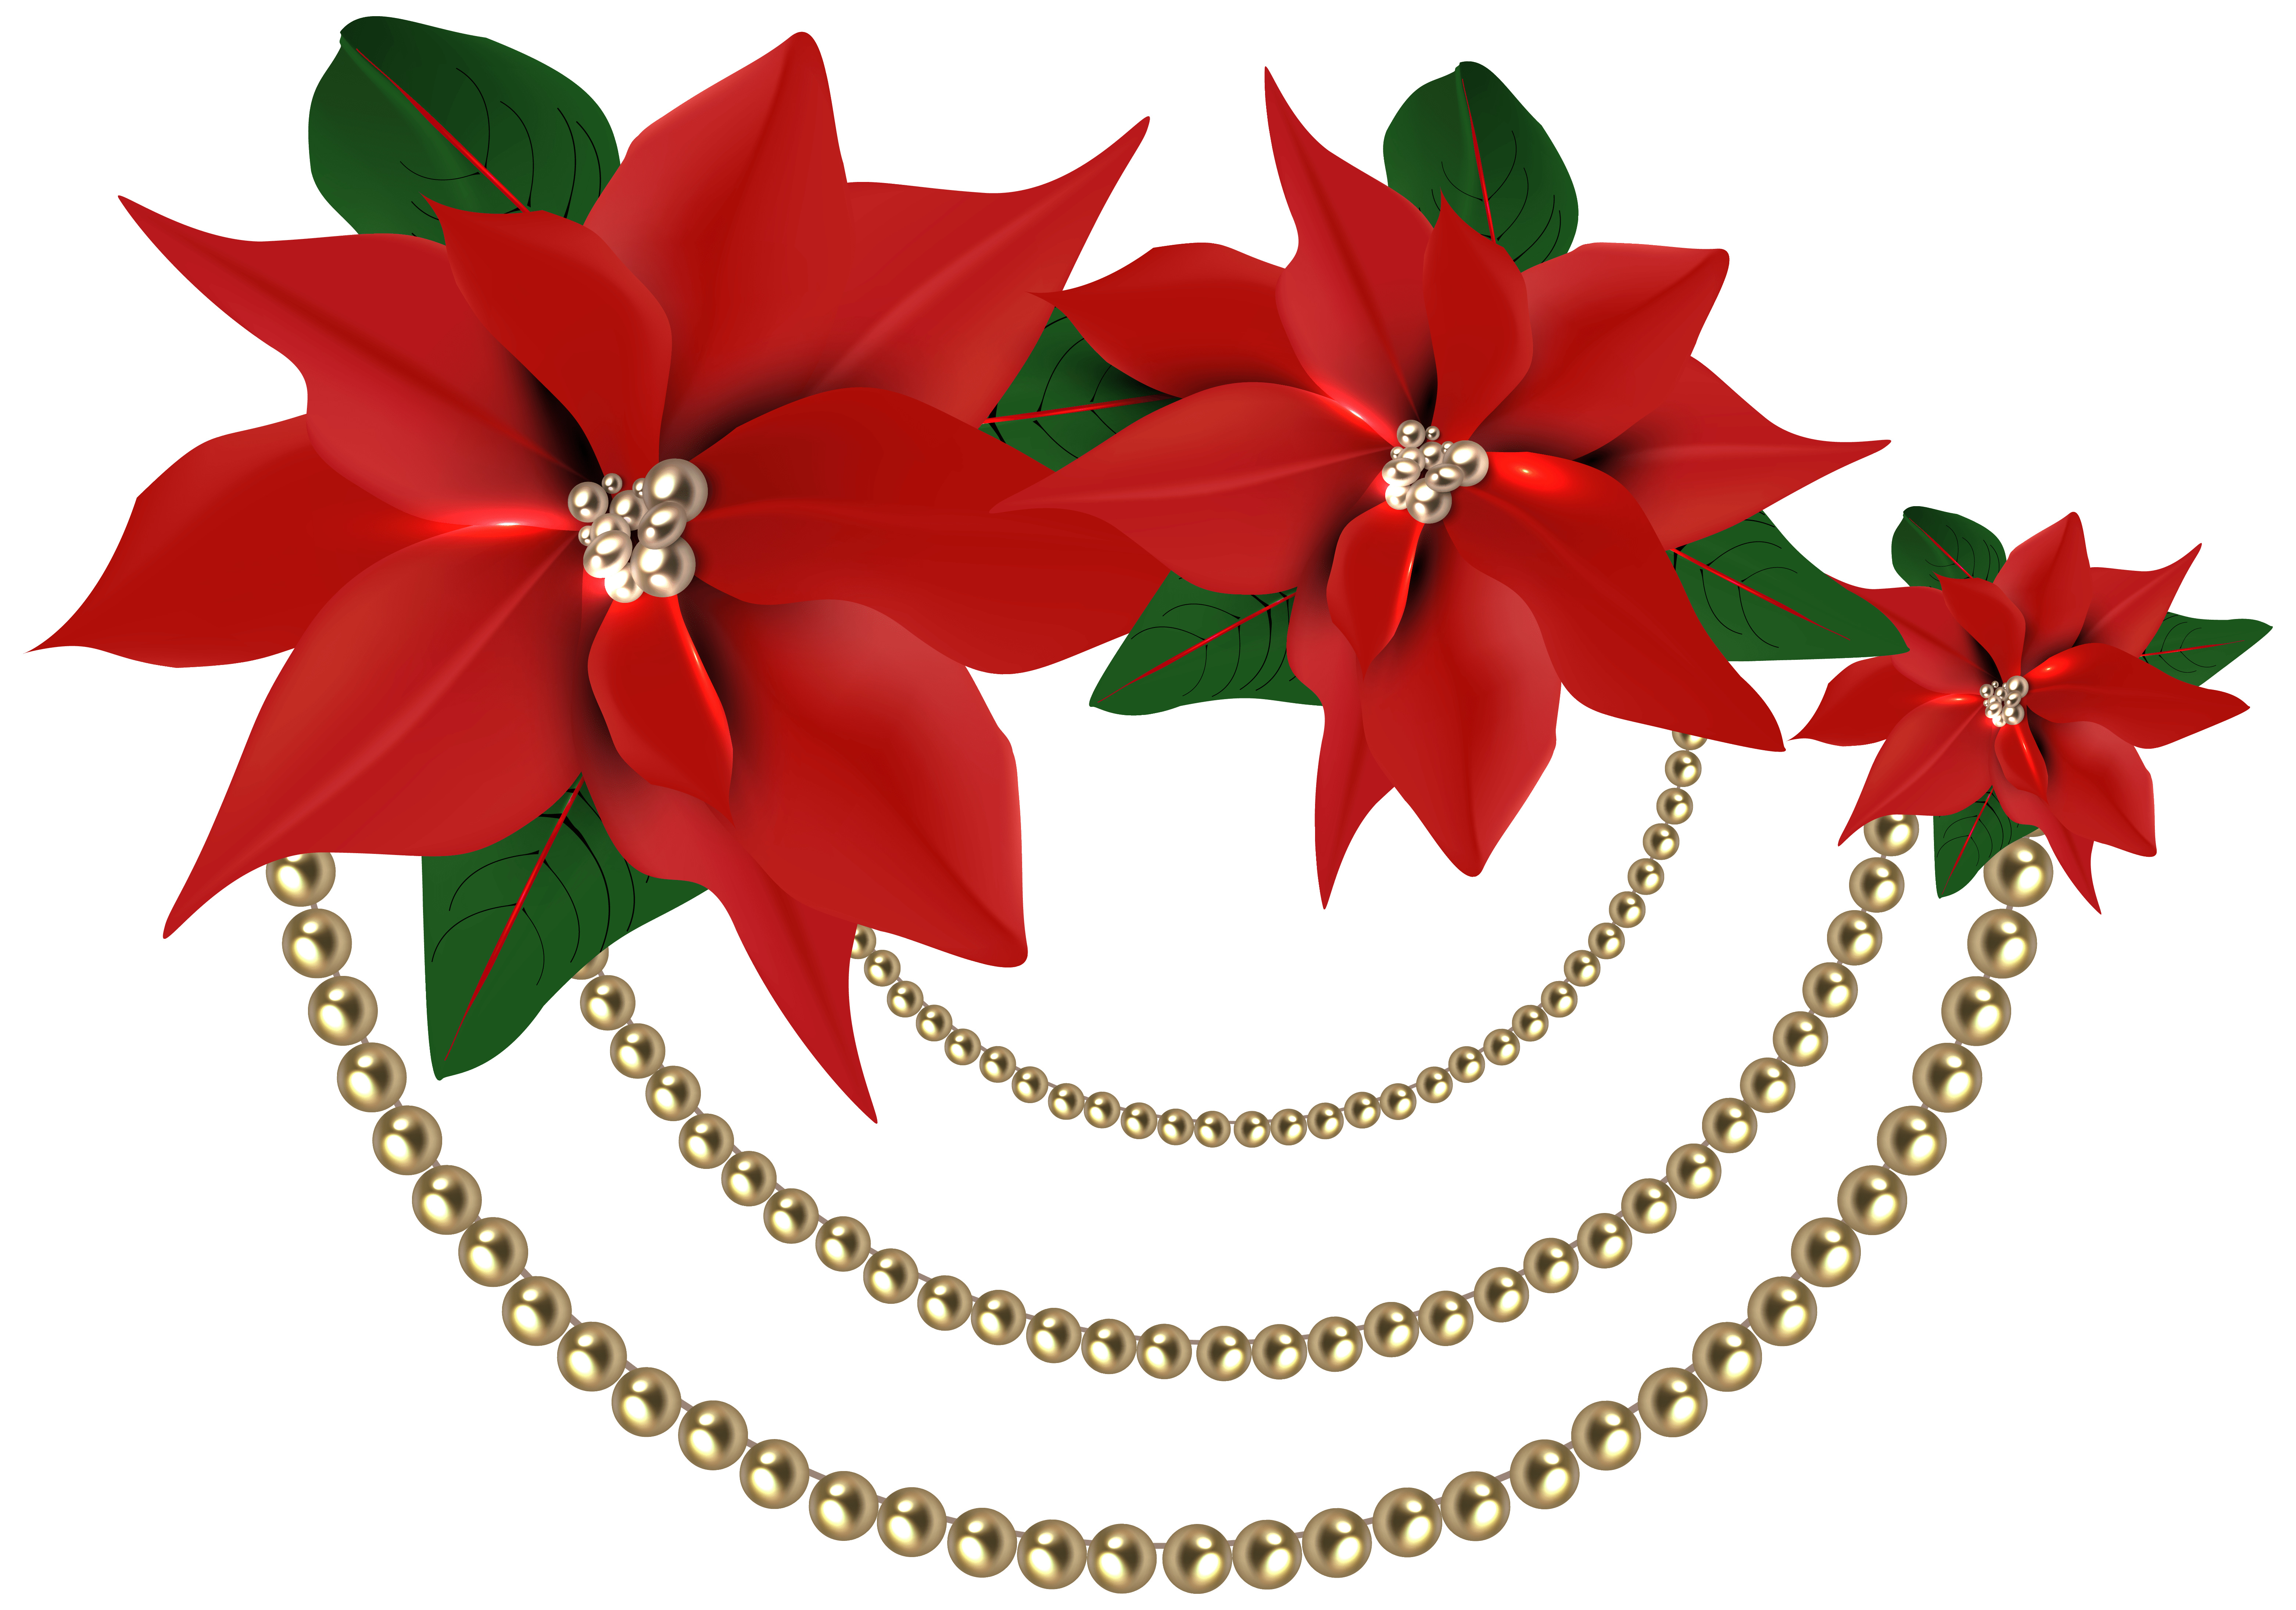 Decorative Christmas Poinsettias with Pearls PNG Clipart Image